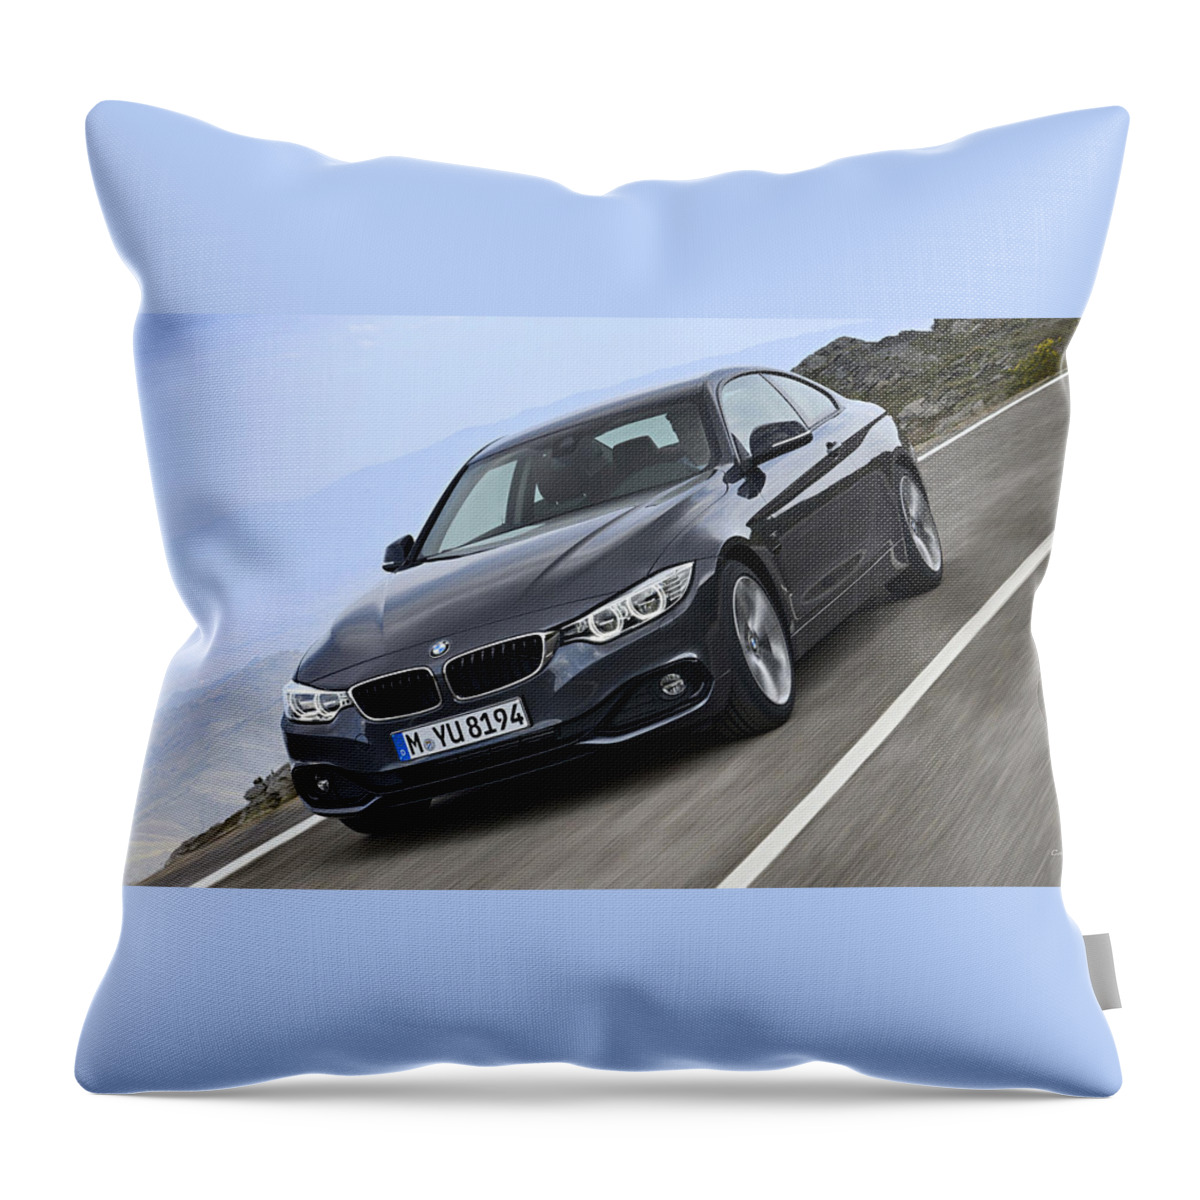 Bmw 4 Series Coupe Throw Pillow featuring the digital art BMW 4 Series Coupe by Maye Loeser